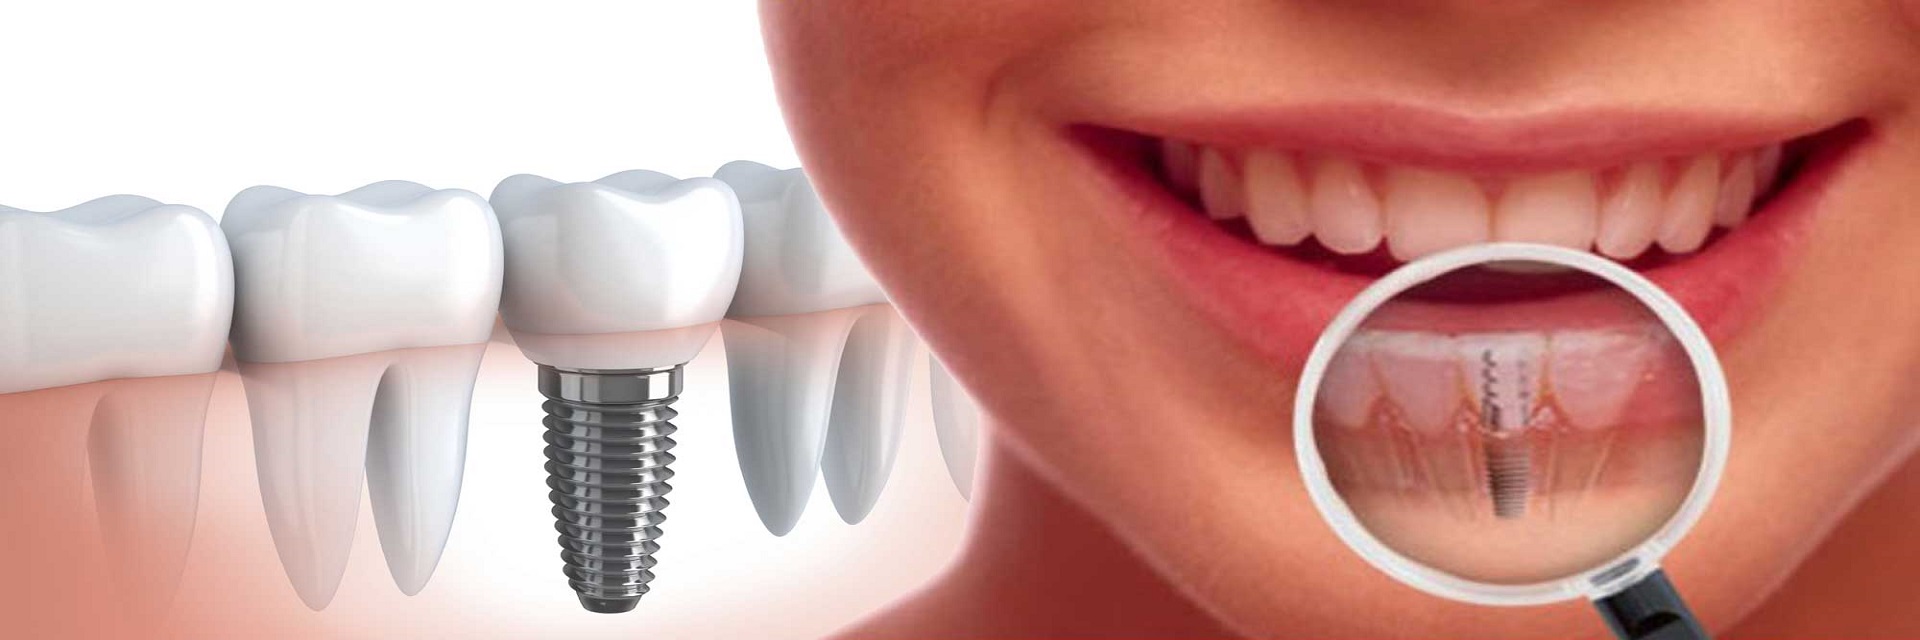 Prosthetics teeth restoration at Affordable Dentistry of Coral Springs